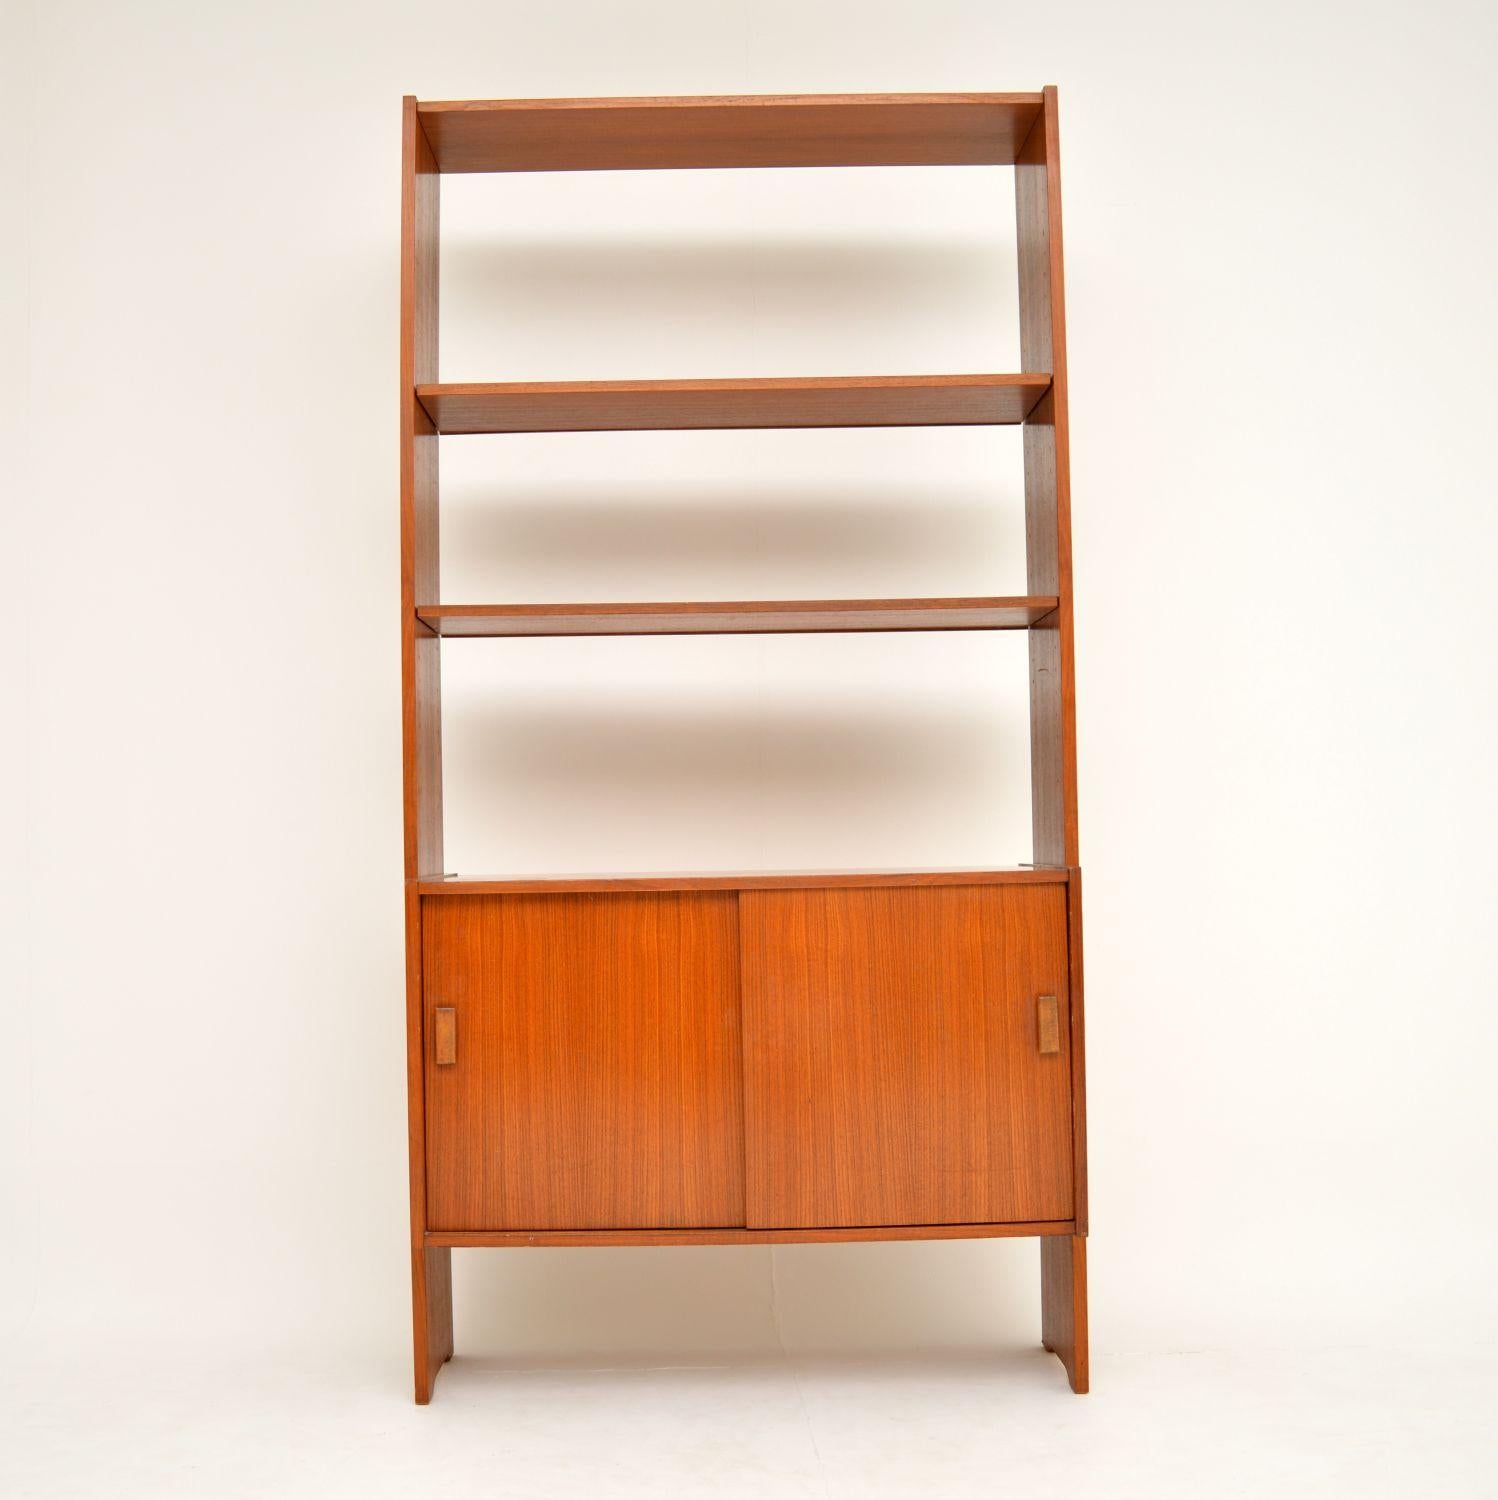 A smart and stylish vintage Danish bookcase in teak, this dates from the 1960s. It’s in lovely original condition, with only some light surface wear and a few very minor marks here and there. The lower cabinet has two sliding doors, and has a